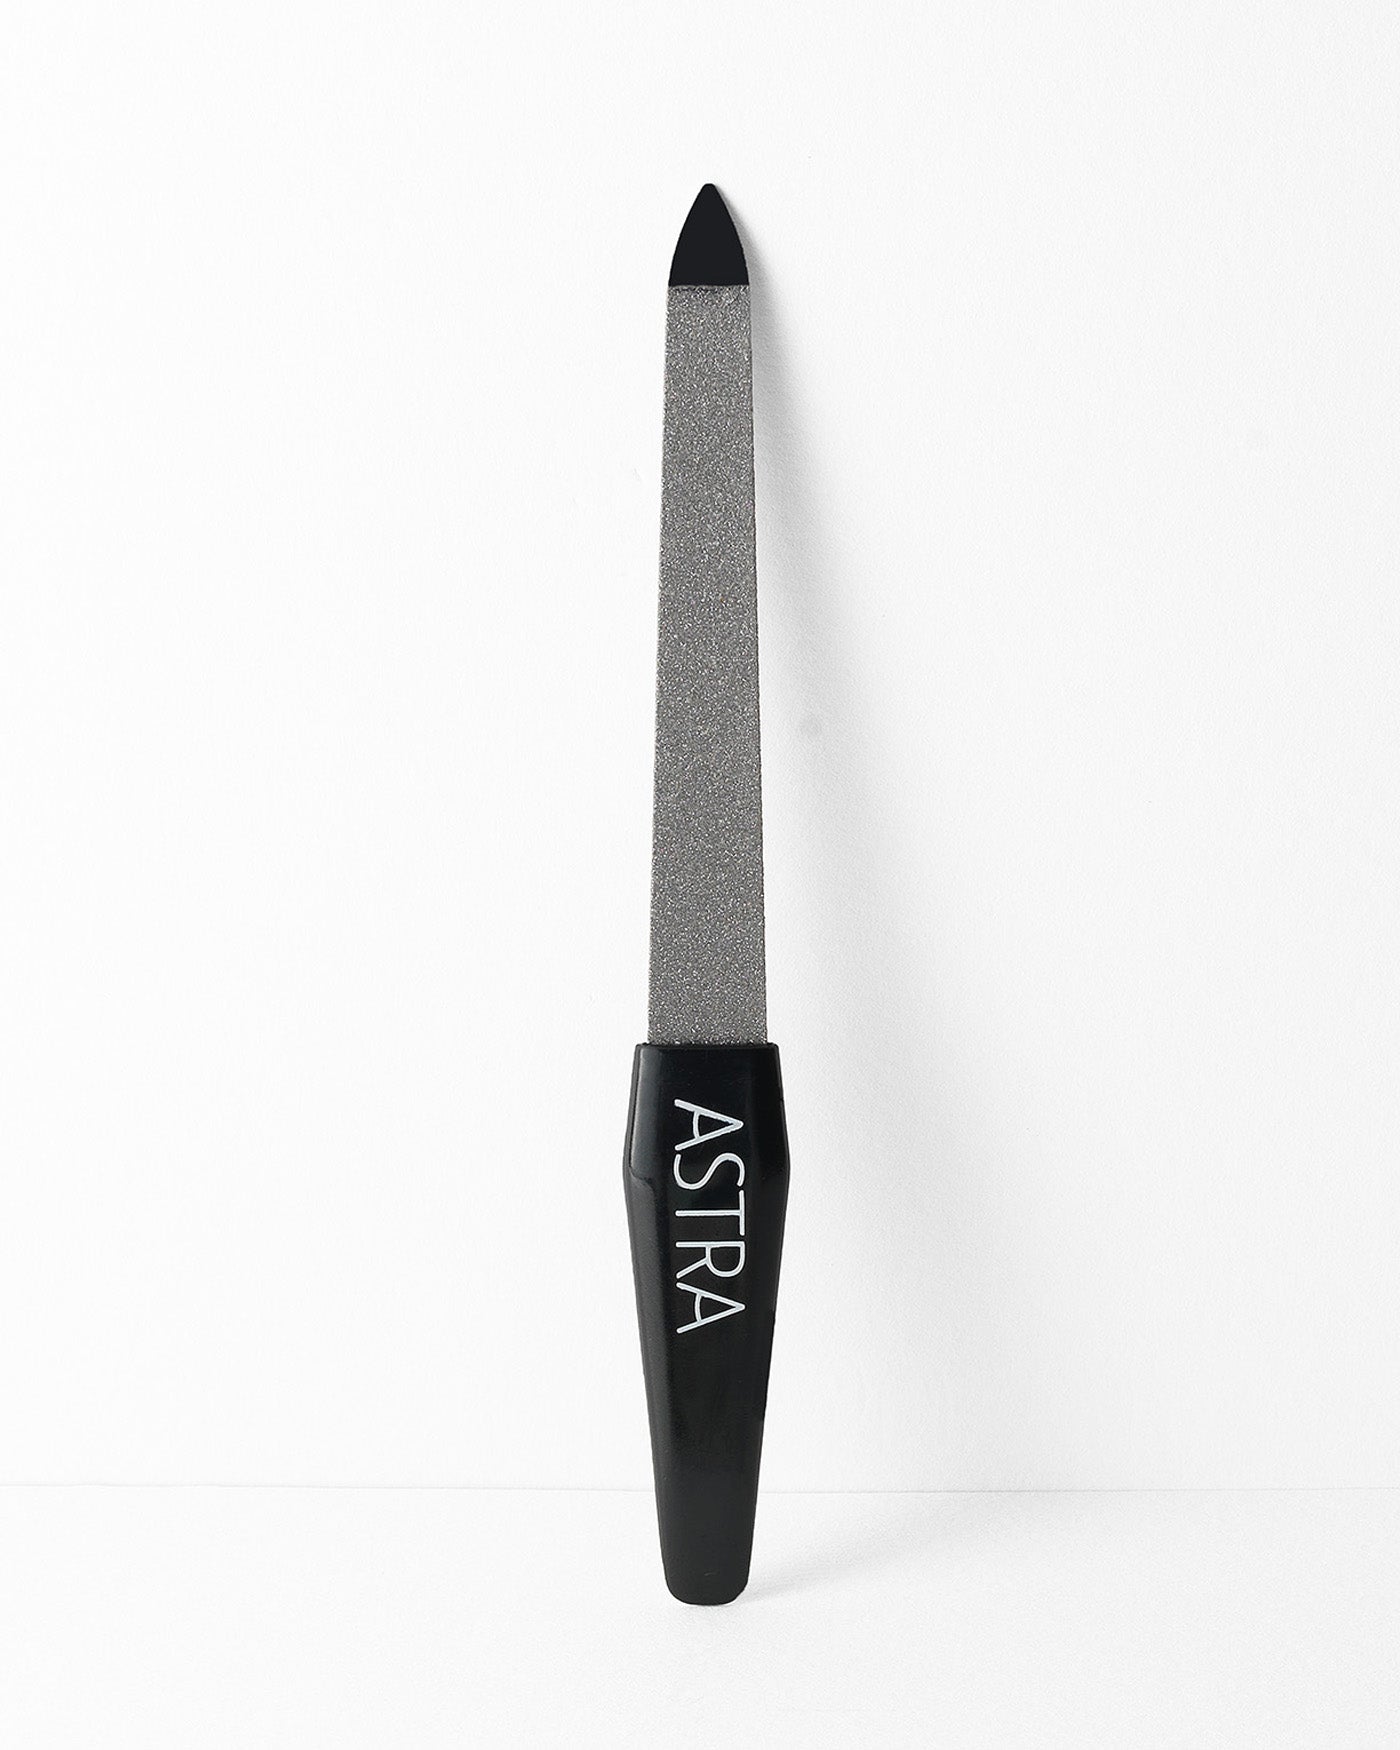 NAIL FILE - All Products - Astra Make-Up